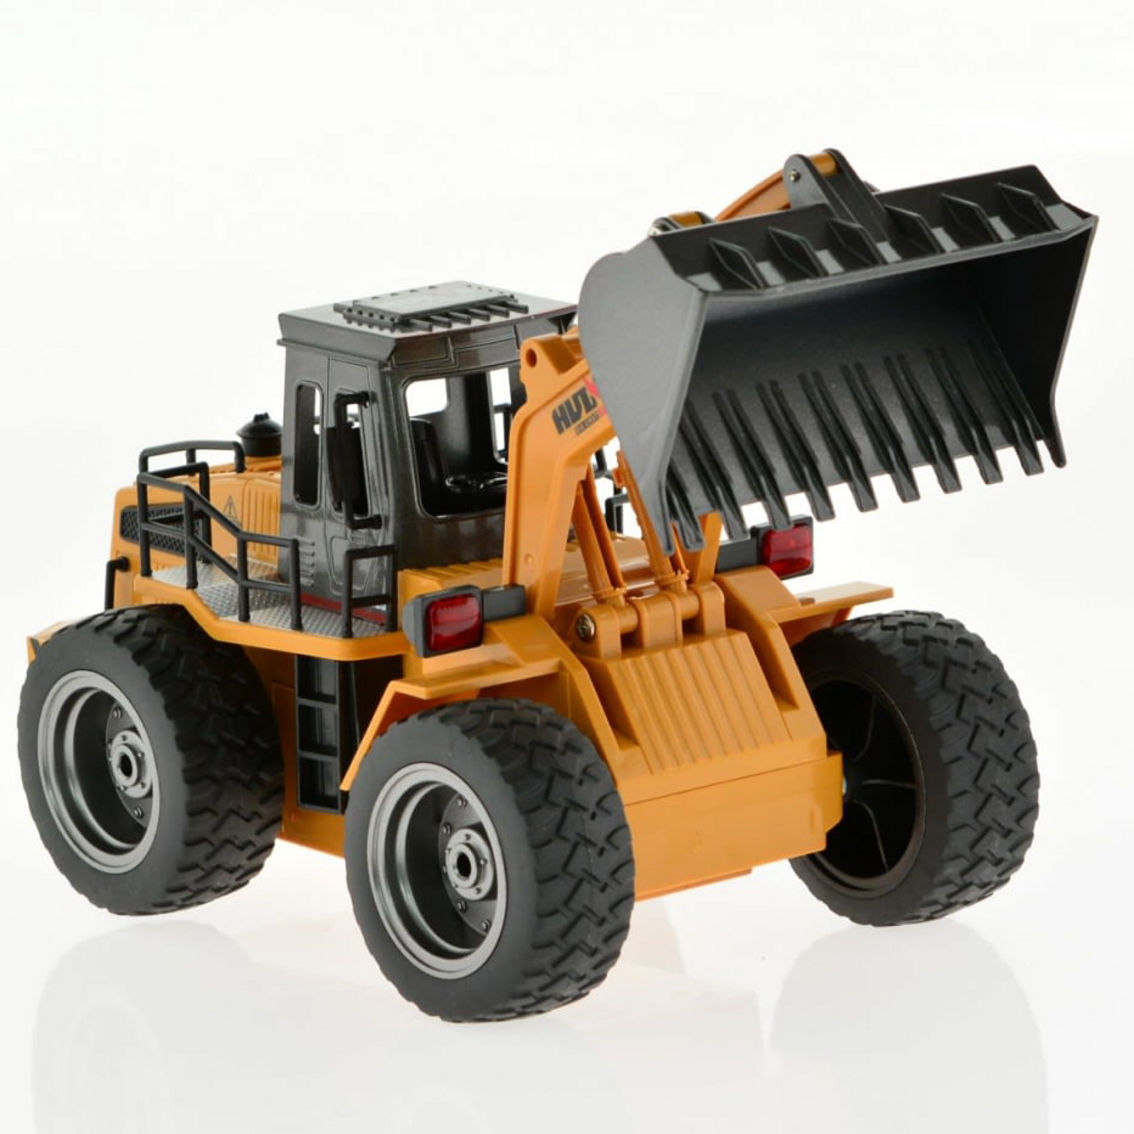 CIS-1520 1:18 2.4 Ghz 6 ch front loader with die cast bucket rechargeable batteries - Image 3 of 5